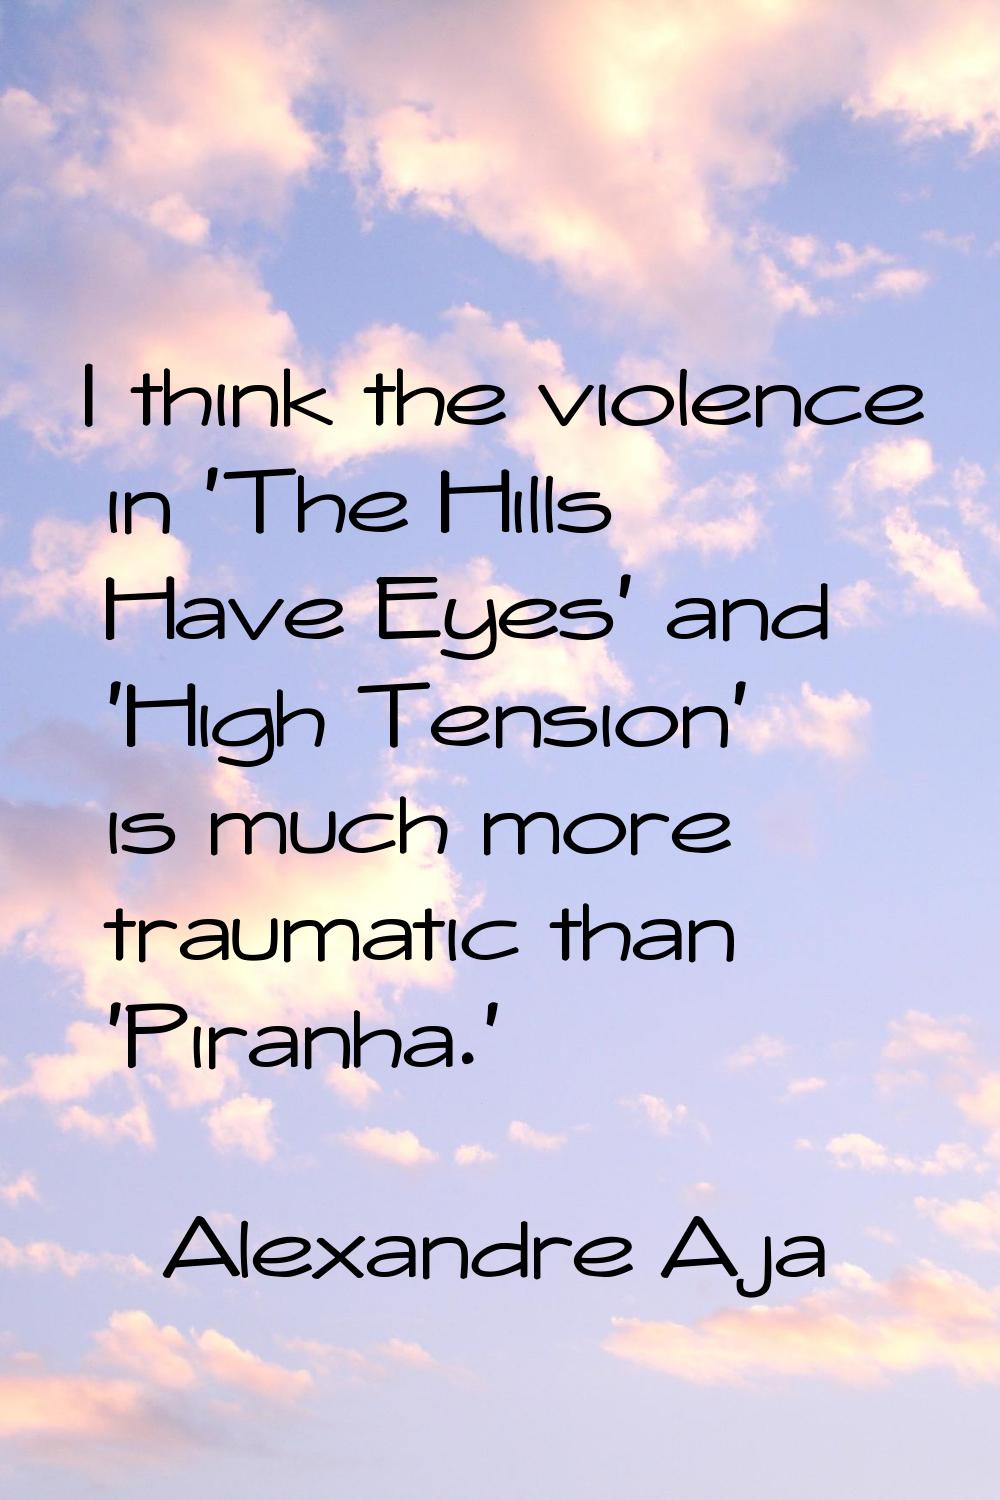 I think the violence in 'The Hills Have Eyes' and 'High Tension' is much more traumatic than 'Piran